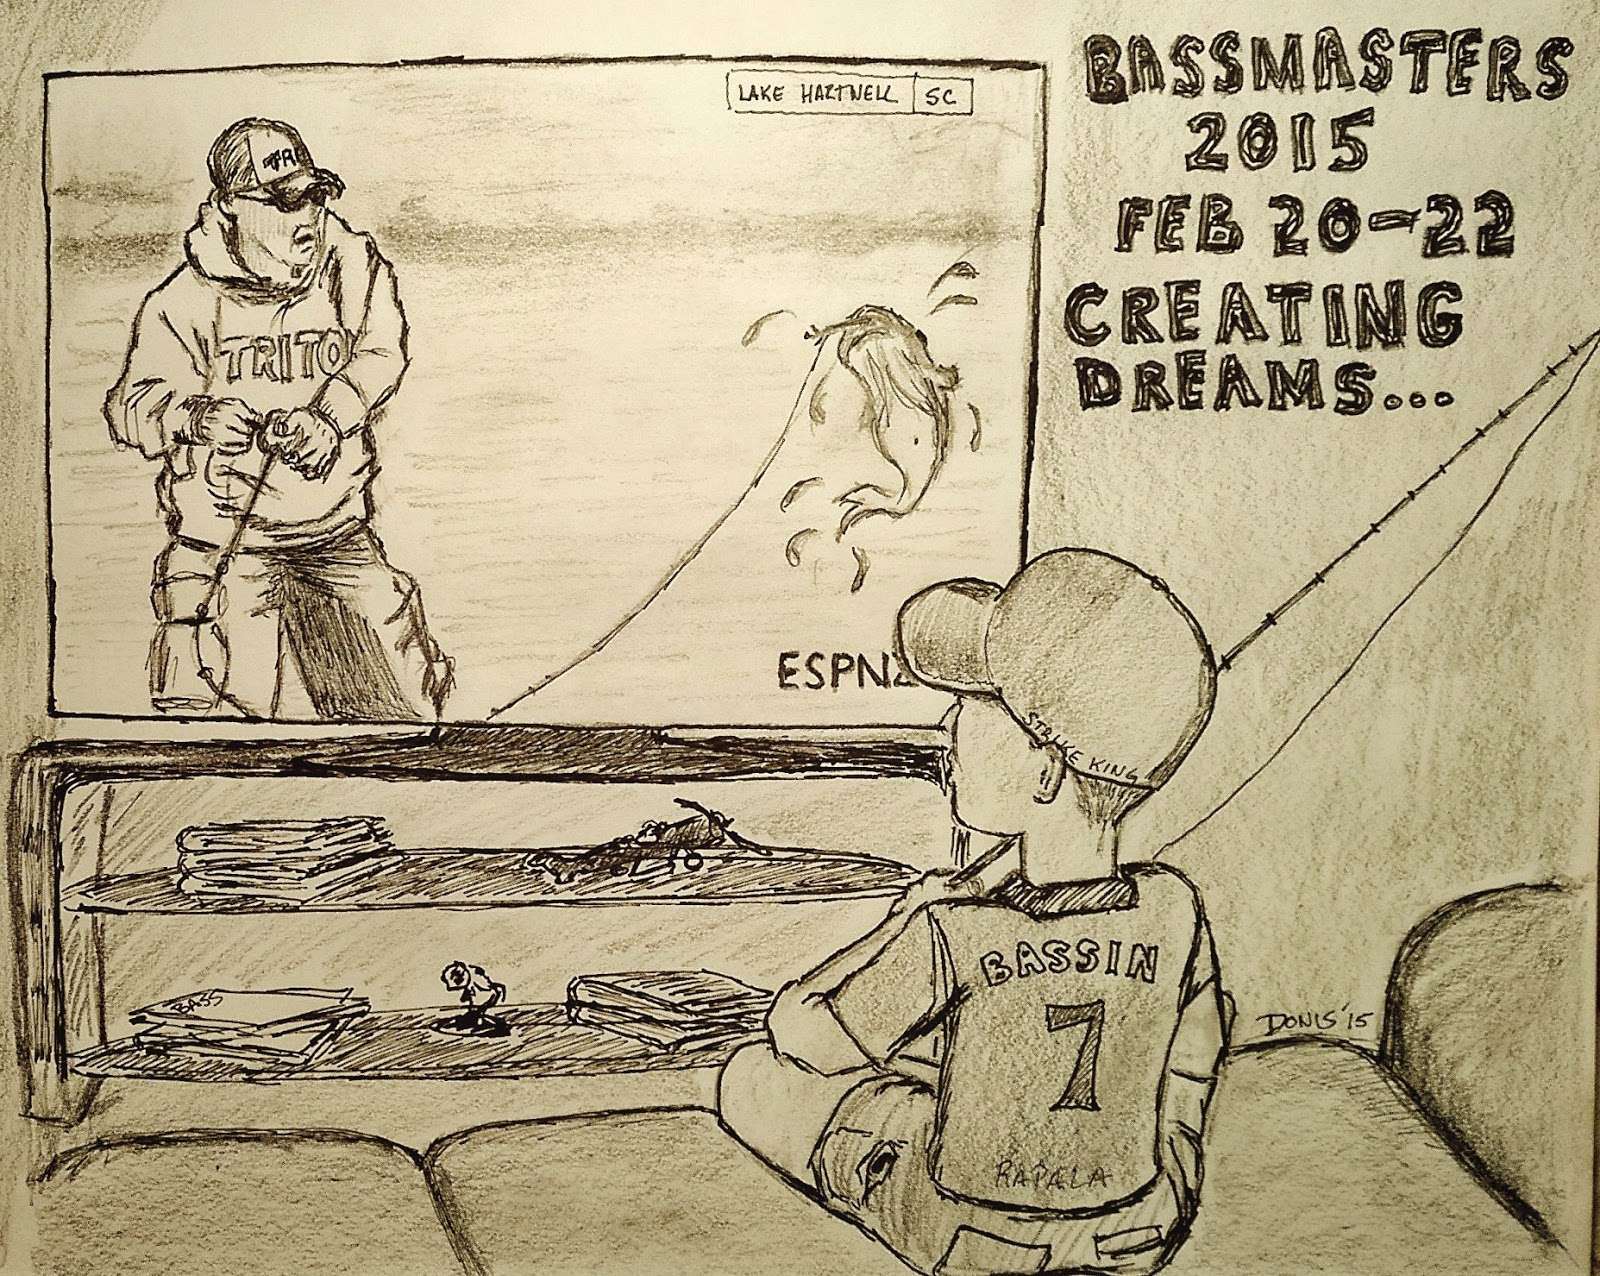 The 2015 GEICO Bassmaster Classic presented by GoPro provided lots of inspiration for Donis. In his blog, Donis describes this illustration: 